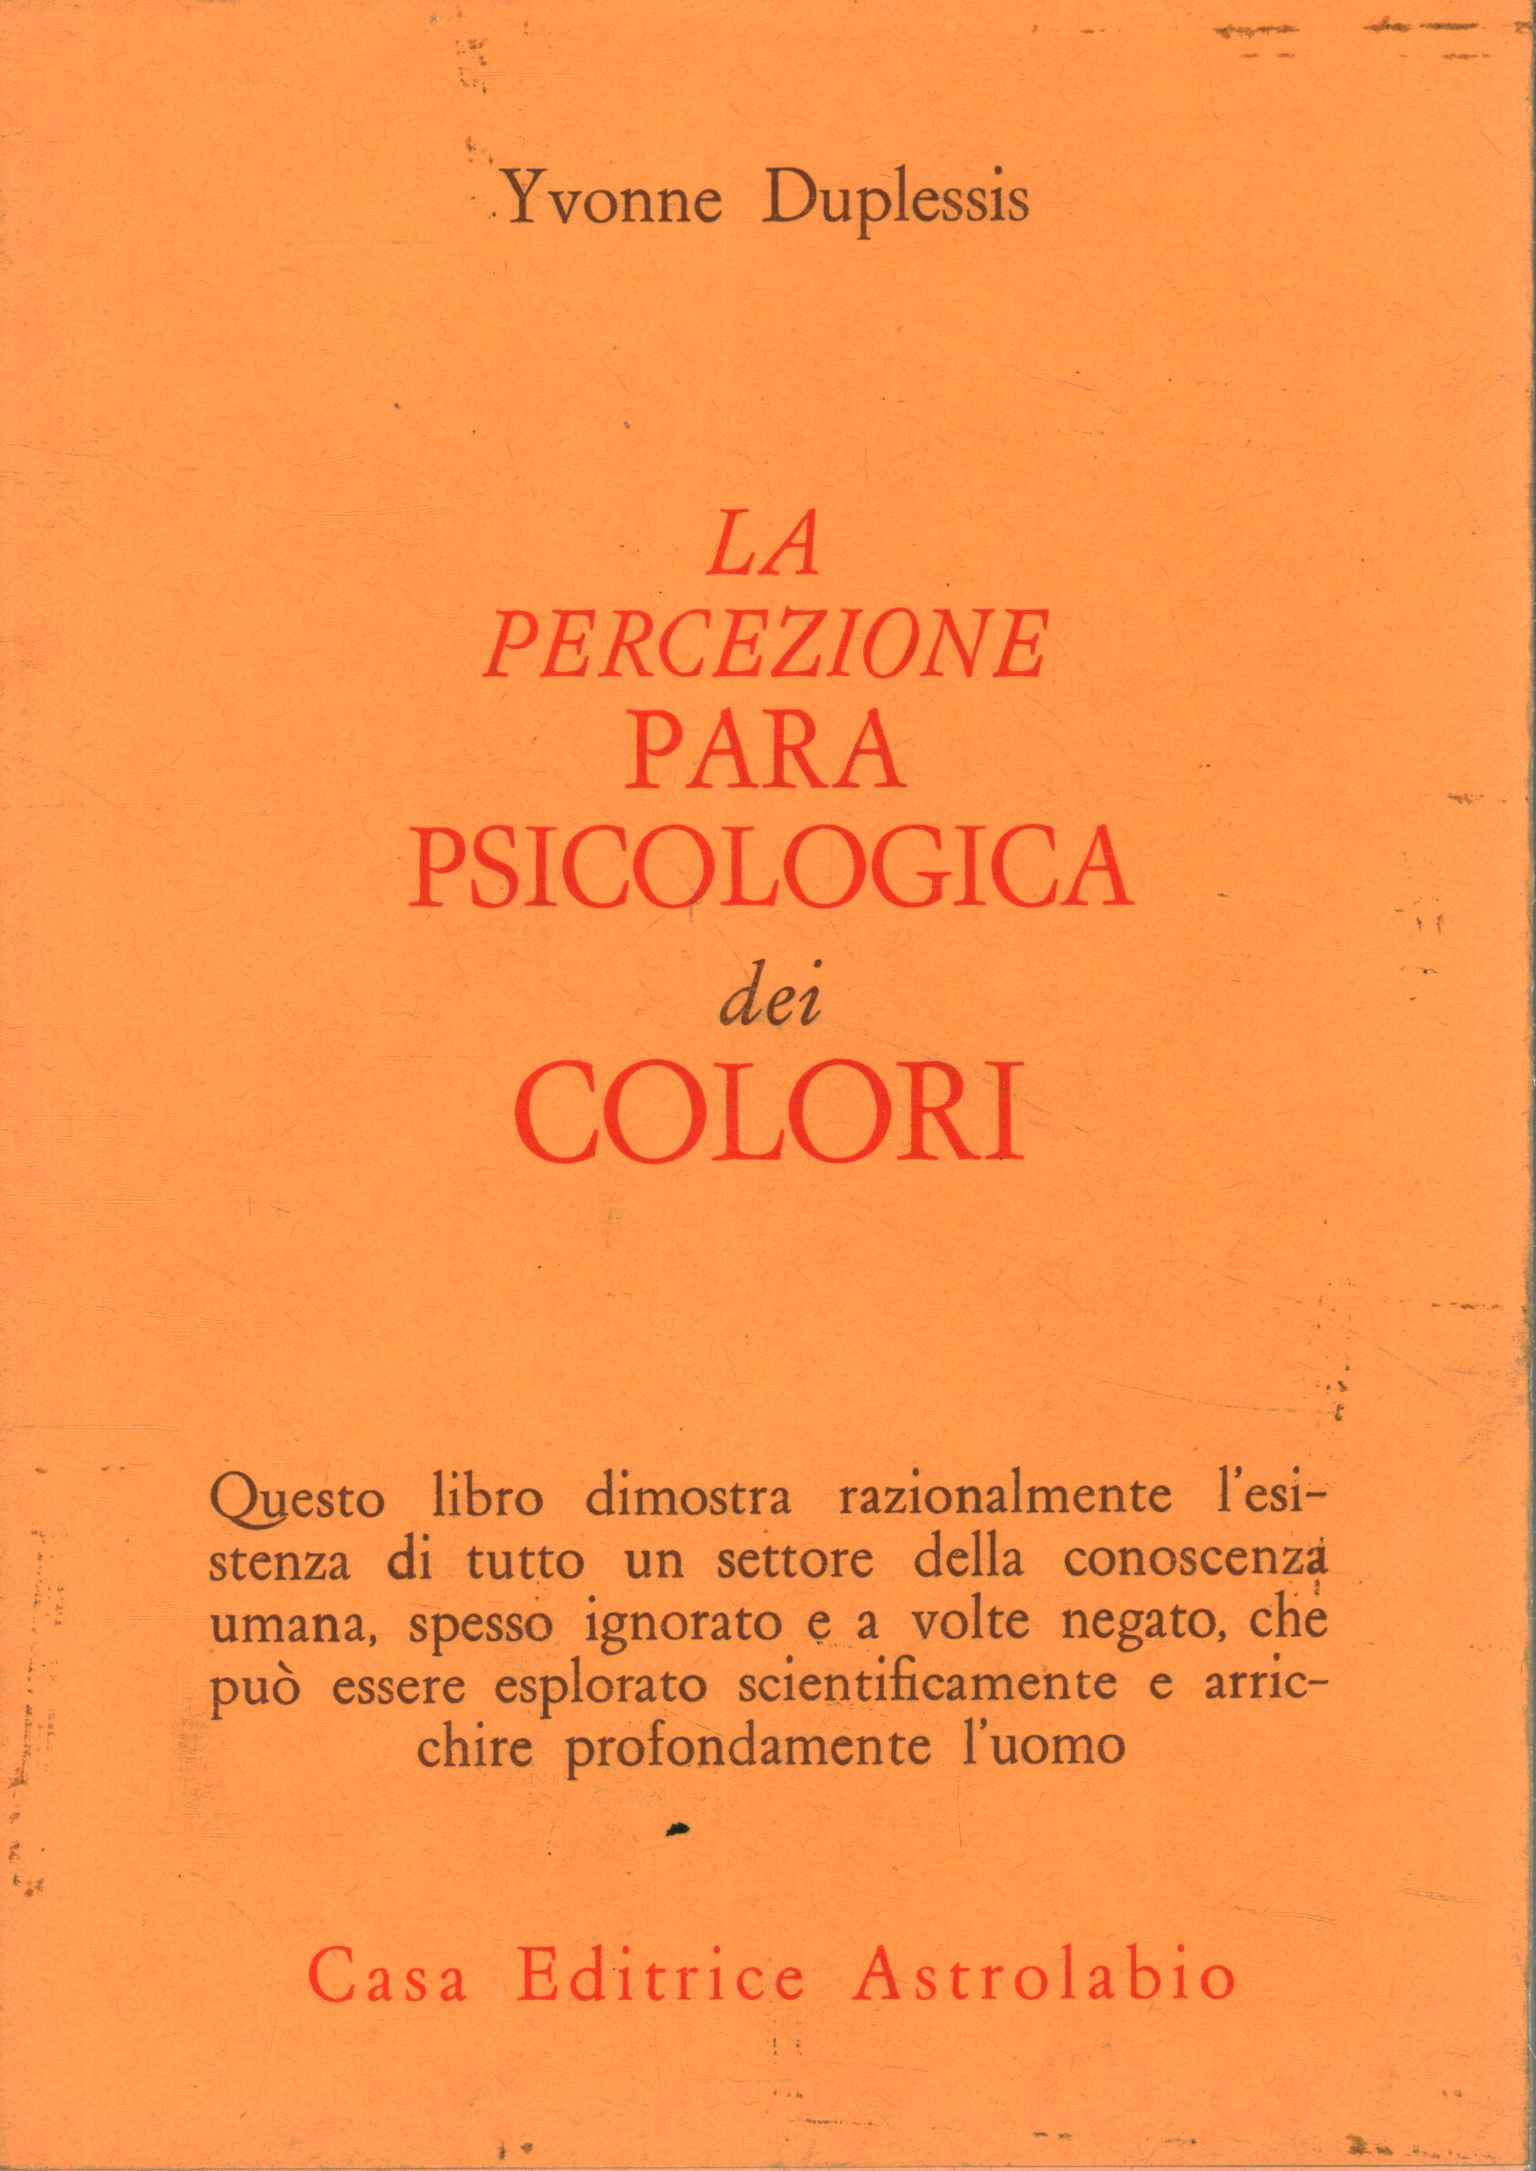 The parapsychological perception of colors